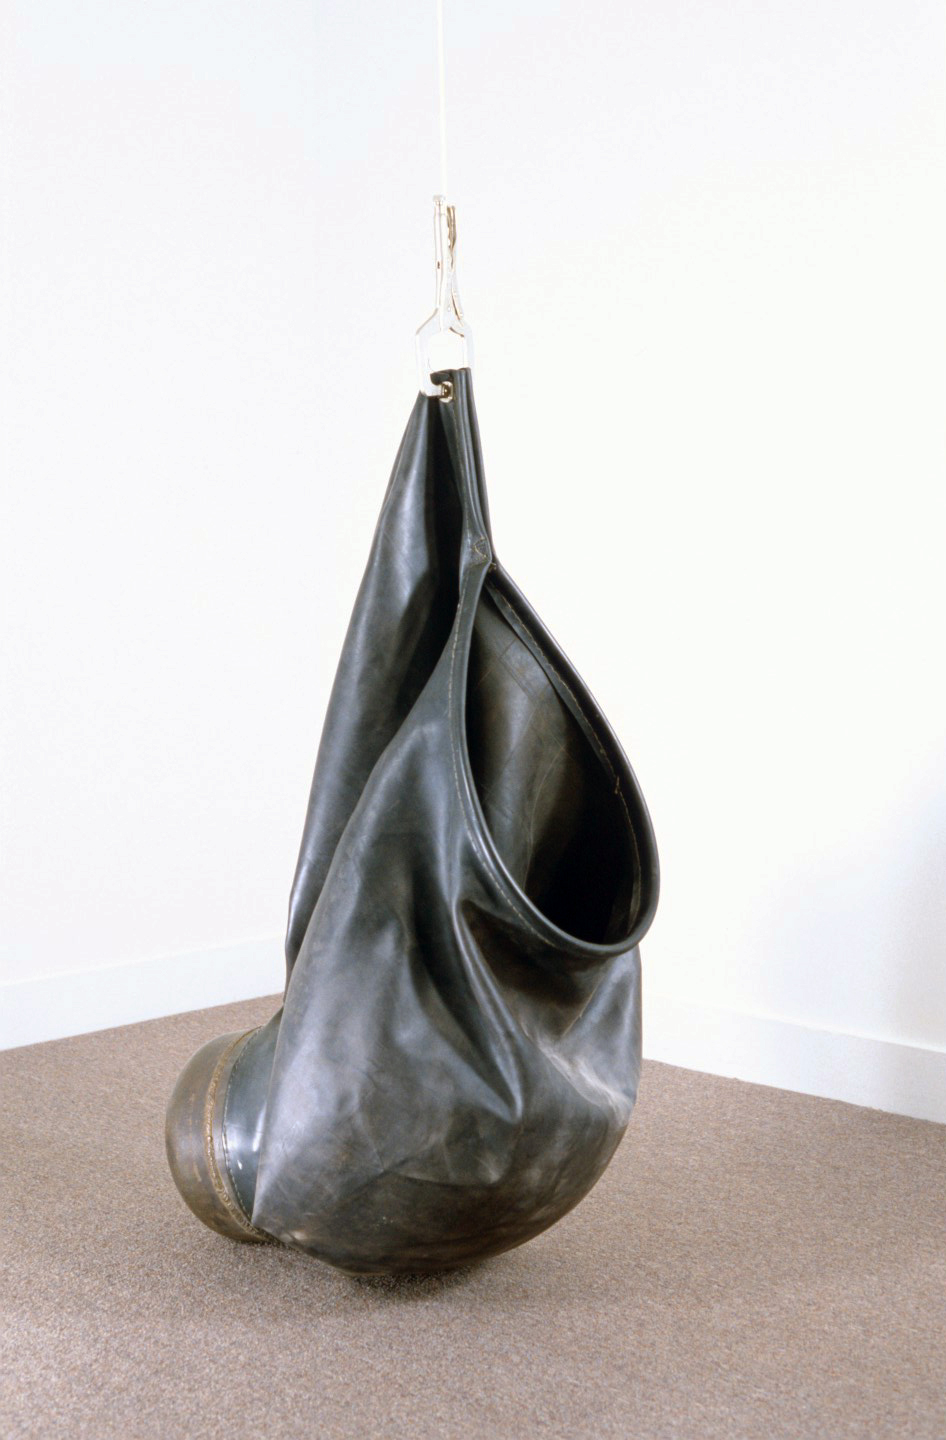   Untitled 95.3   1995  rubber and steel  48 X 27 X 32"   